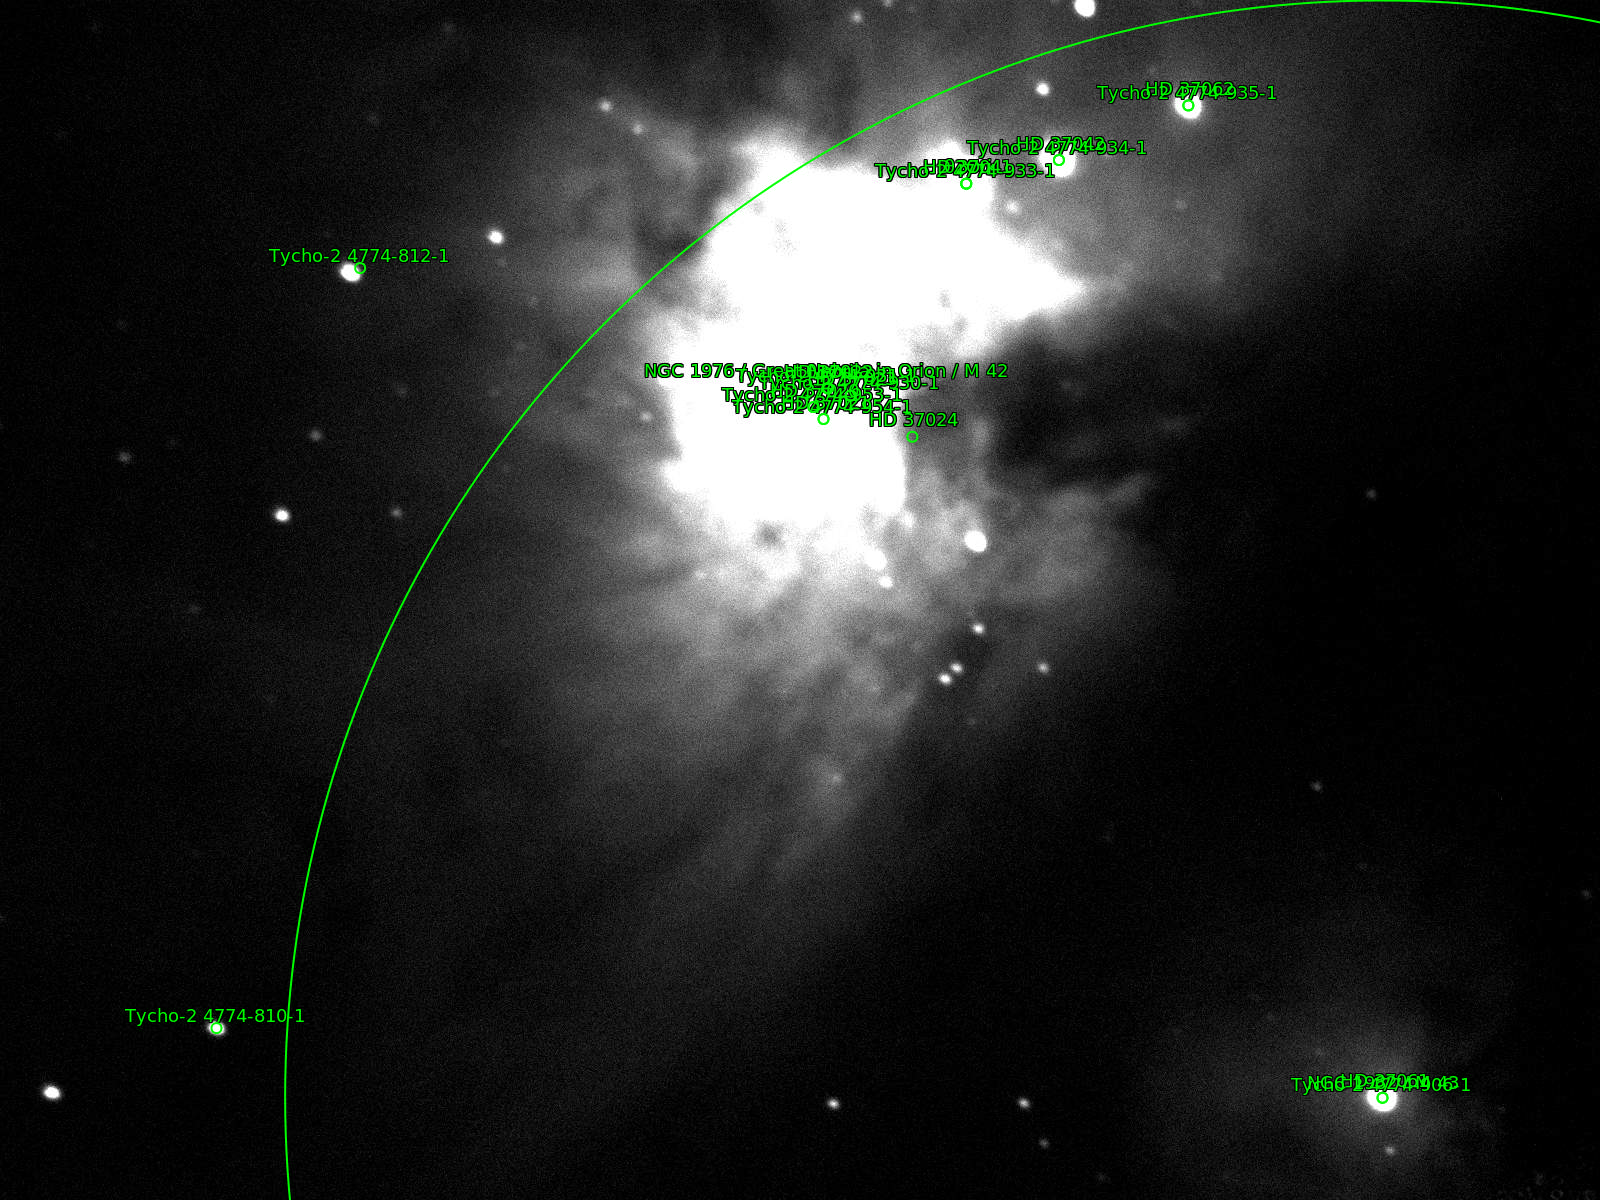 Astrometry.net fit for our Orion image. From http://nova.astrometry.net/user_images/622647#annotated.